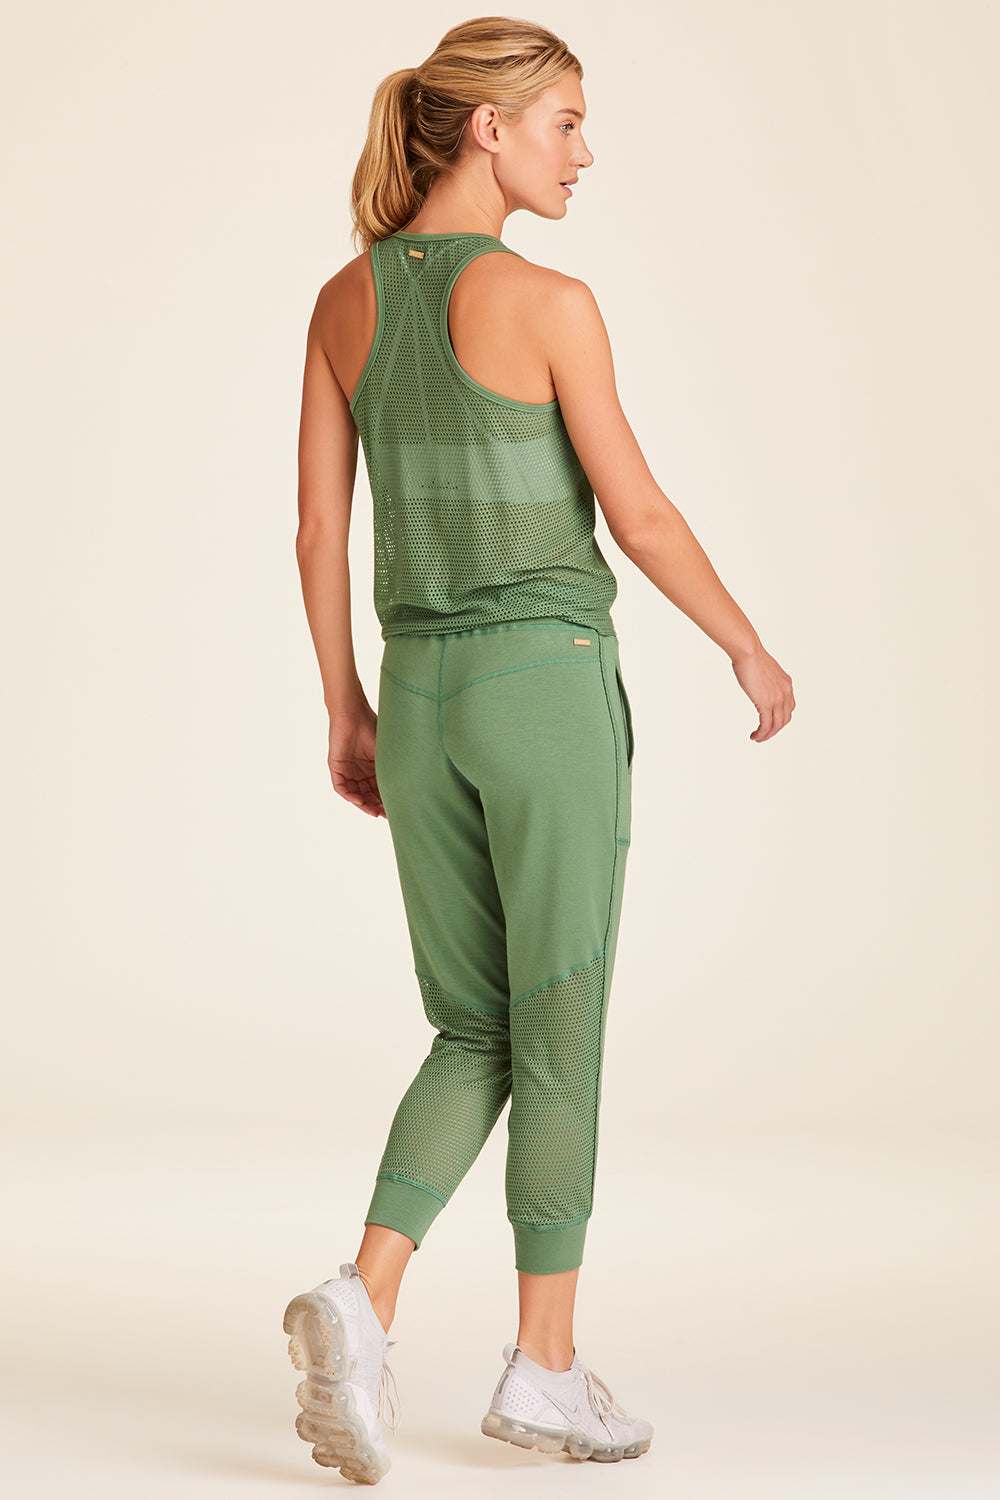 Full body back view of Alala Luxury Women's Athleisure heron tank in agave green